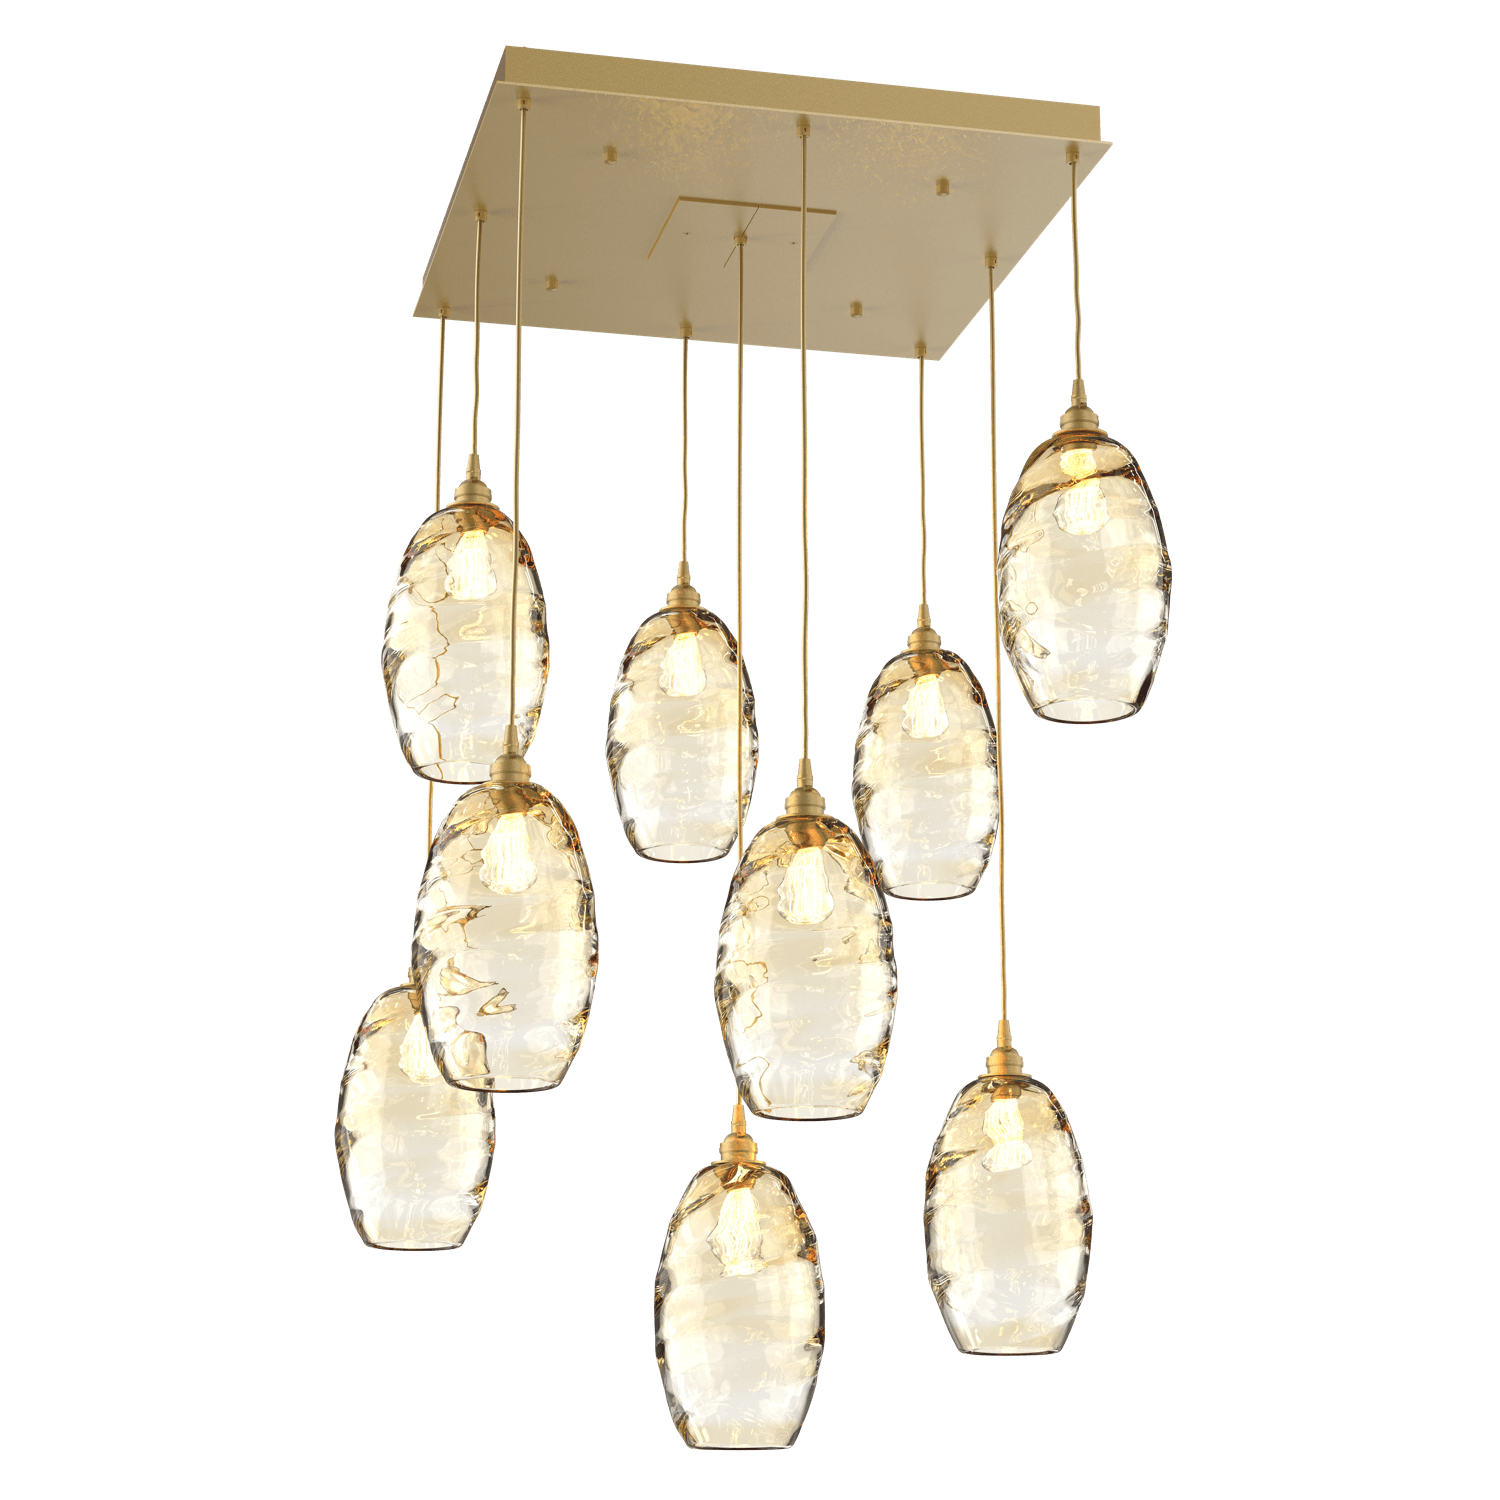 CHB0035-09-GB-OA-Hammerton-Studio-Optic-Blown-Glass-Elisse-9-light-square-pendant-chandelier-with-gilded-brass-finish-and-optic-amber-blown-glass-shades-and-incandescent-lamping